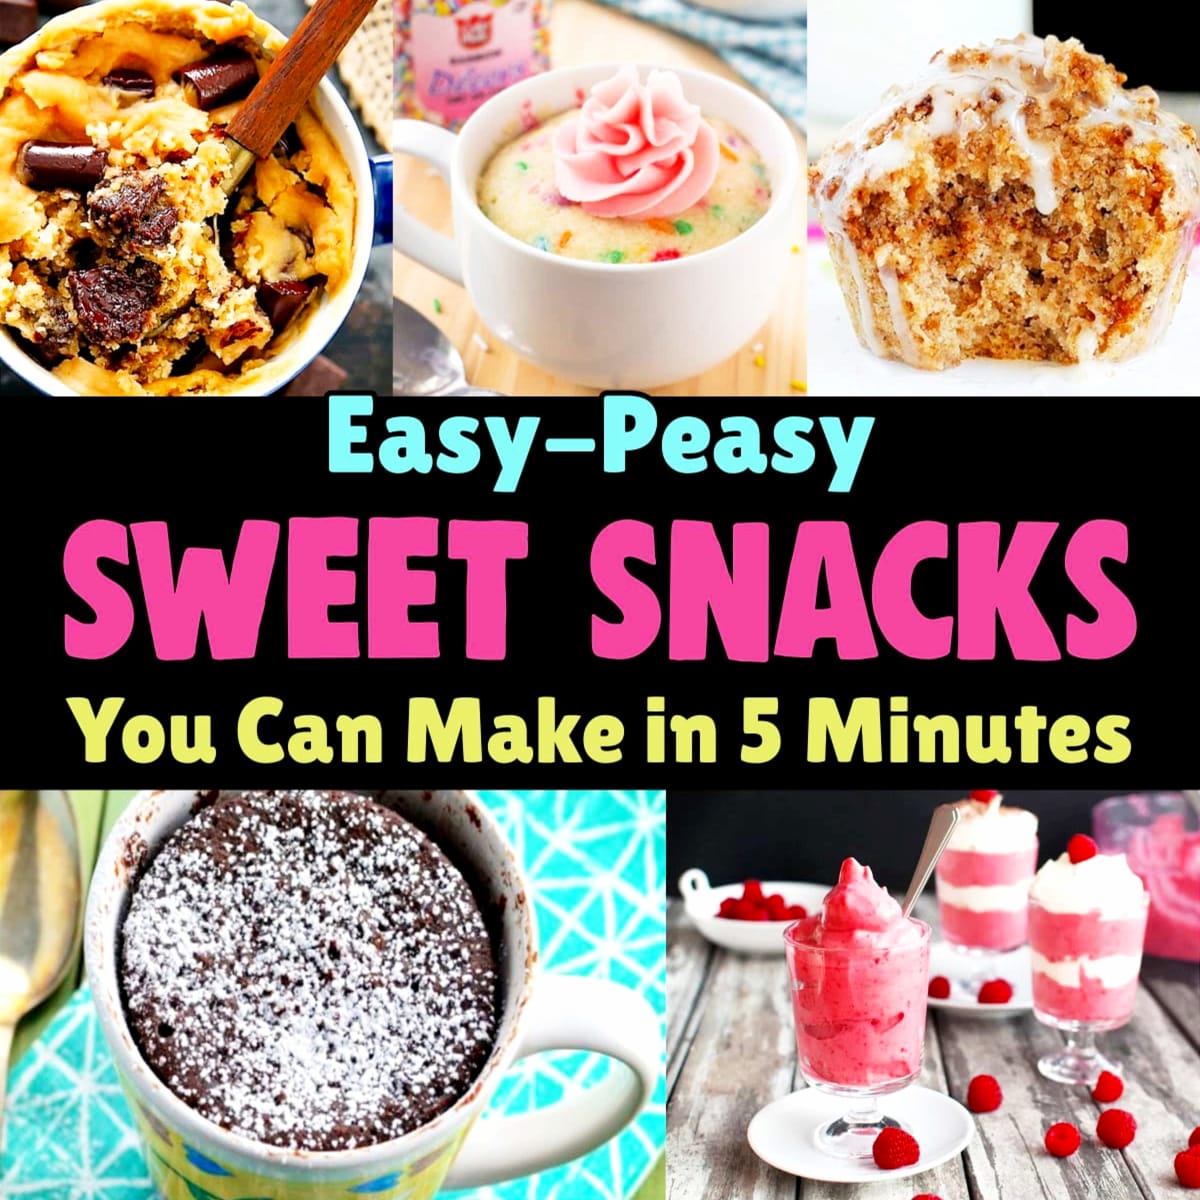 Easy Snacks To Make In 5 Minutes with Little Ingredients - from easy sweet midnight snacks, to homemade snacks for school, here is a BIG list of easy to make snacks and sweet treats with few ingredients